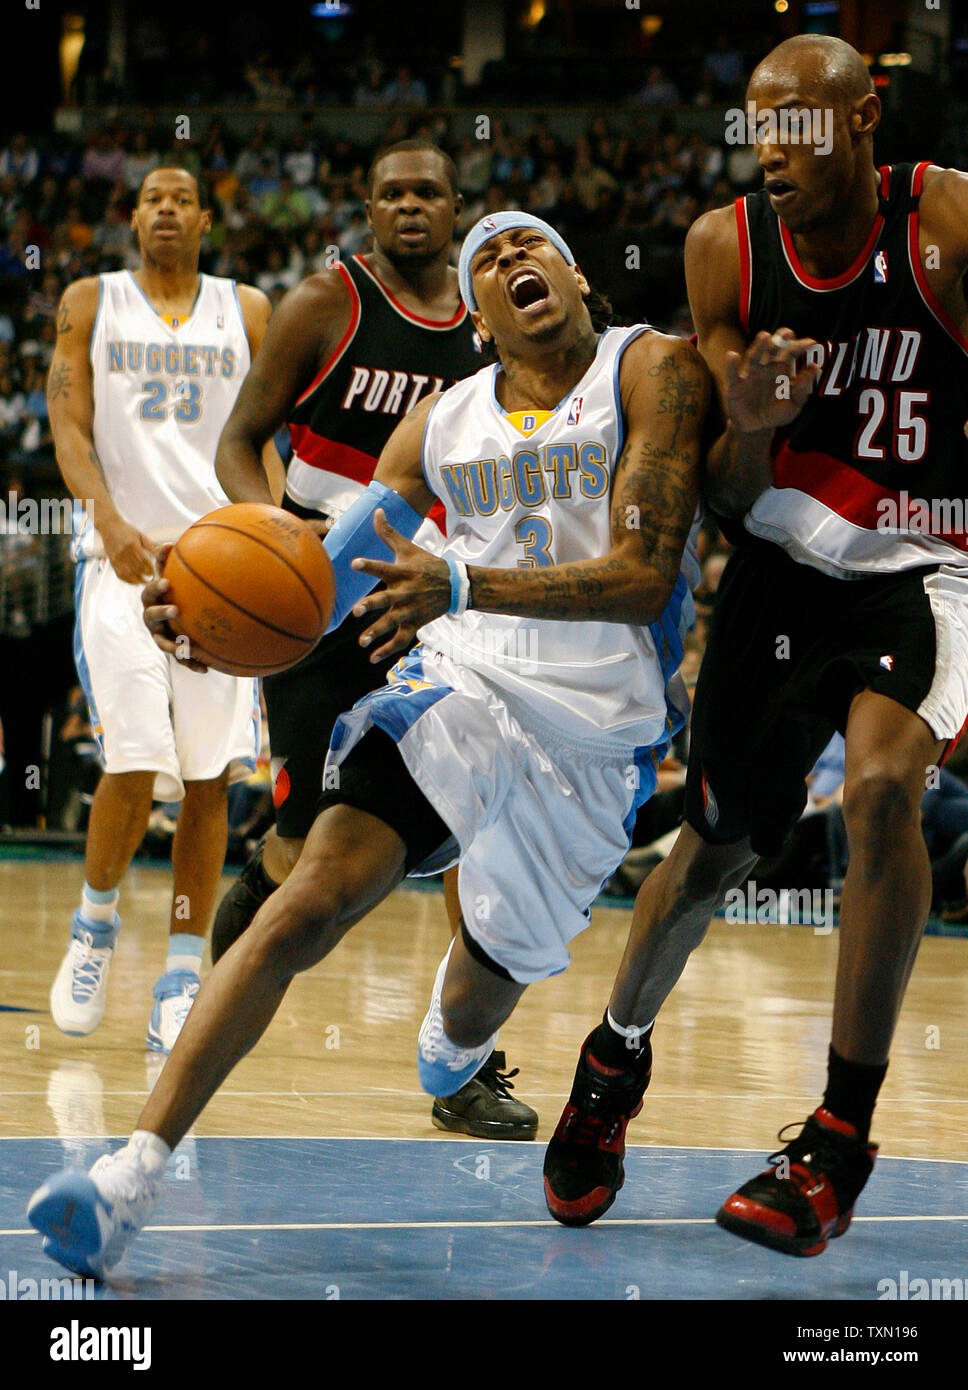 Denver Nuggets guard Allen Iverson (C) scores against Portland Trail  Blazers Brandon Roy (R) during the second half at the Pepsi Center in  Denver on March 13, 2007. Nuggets Marcus Camby (L)